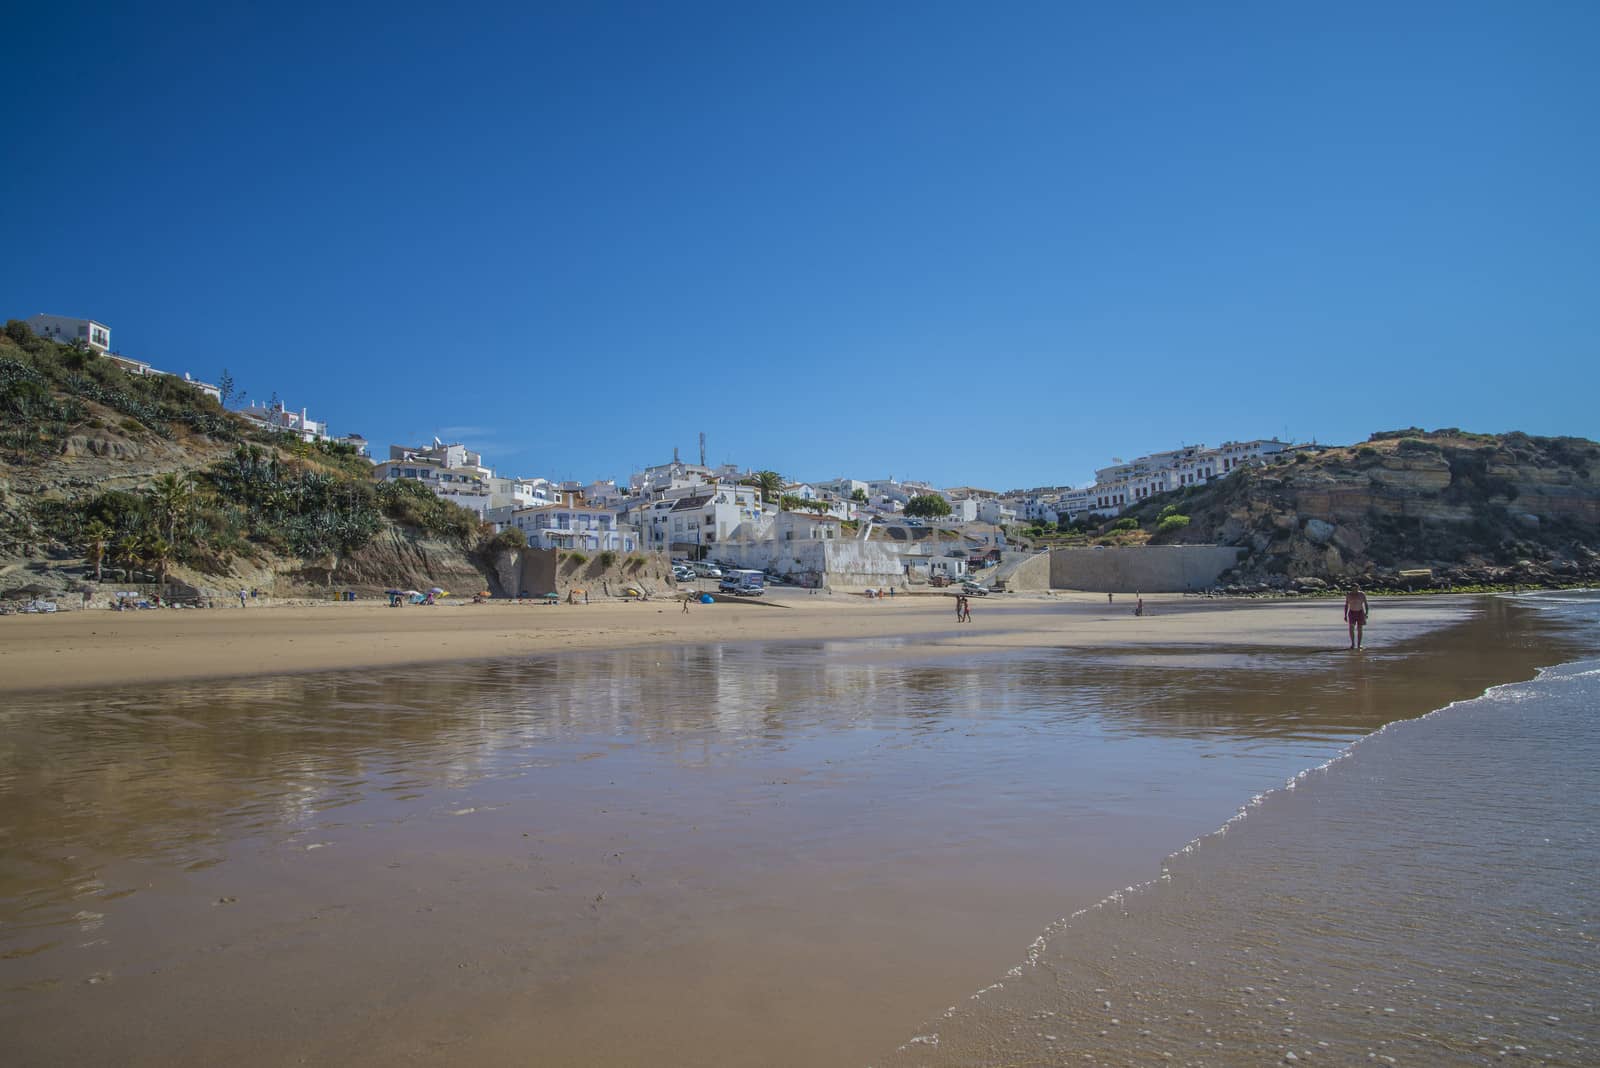 Subject is taken off the beach at Burgau, Algarve, Portugal.